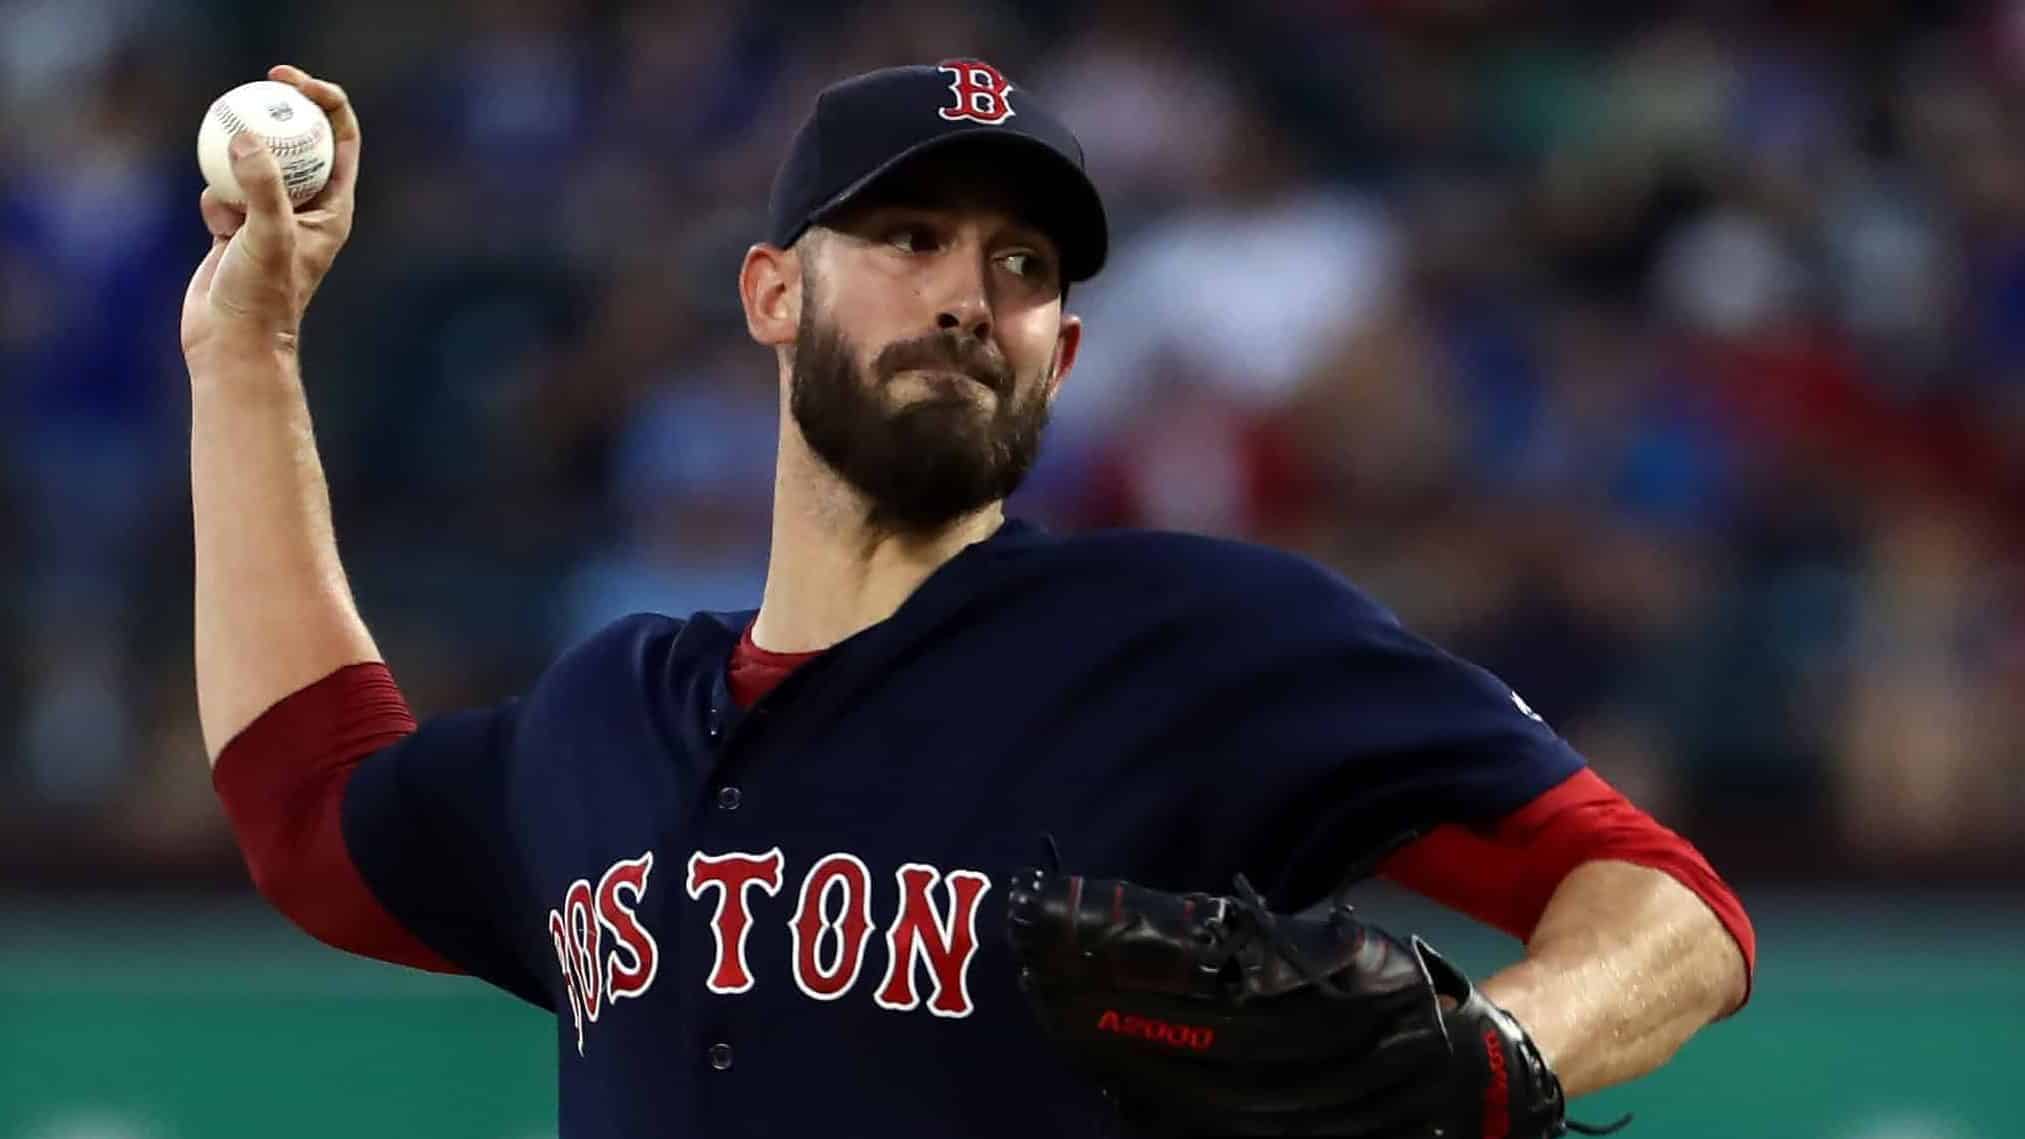 ARLINGTON, TEXAS - SEPTEMBER 25: Rick Porcello #22 of the Boston Red Sox throws against the Texas Rangers in the first inning at Globe Life Park in Arlington on September 25, 2019 in Arlington, Texas.